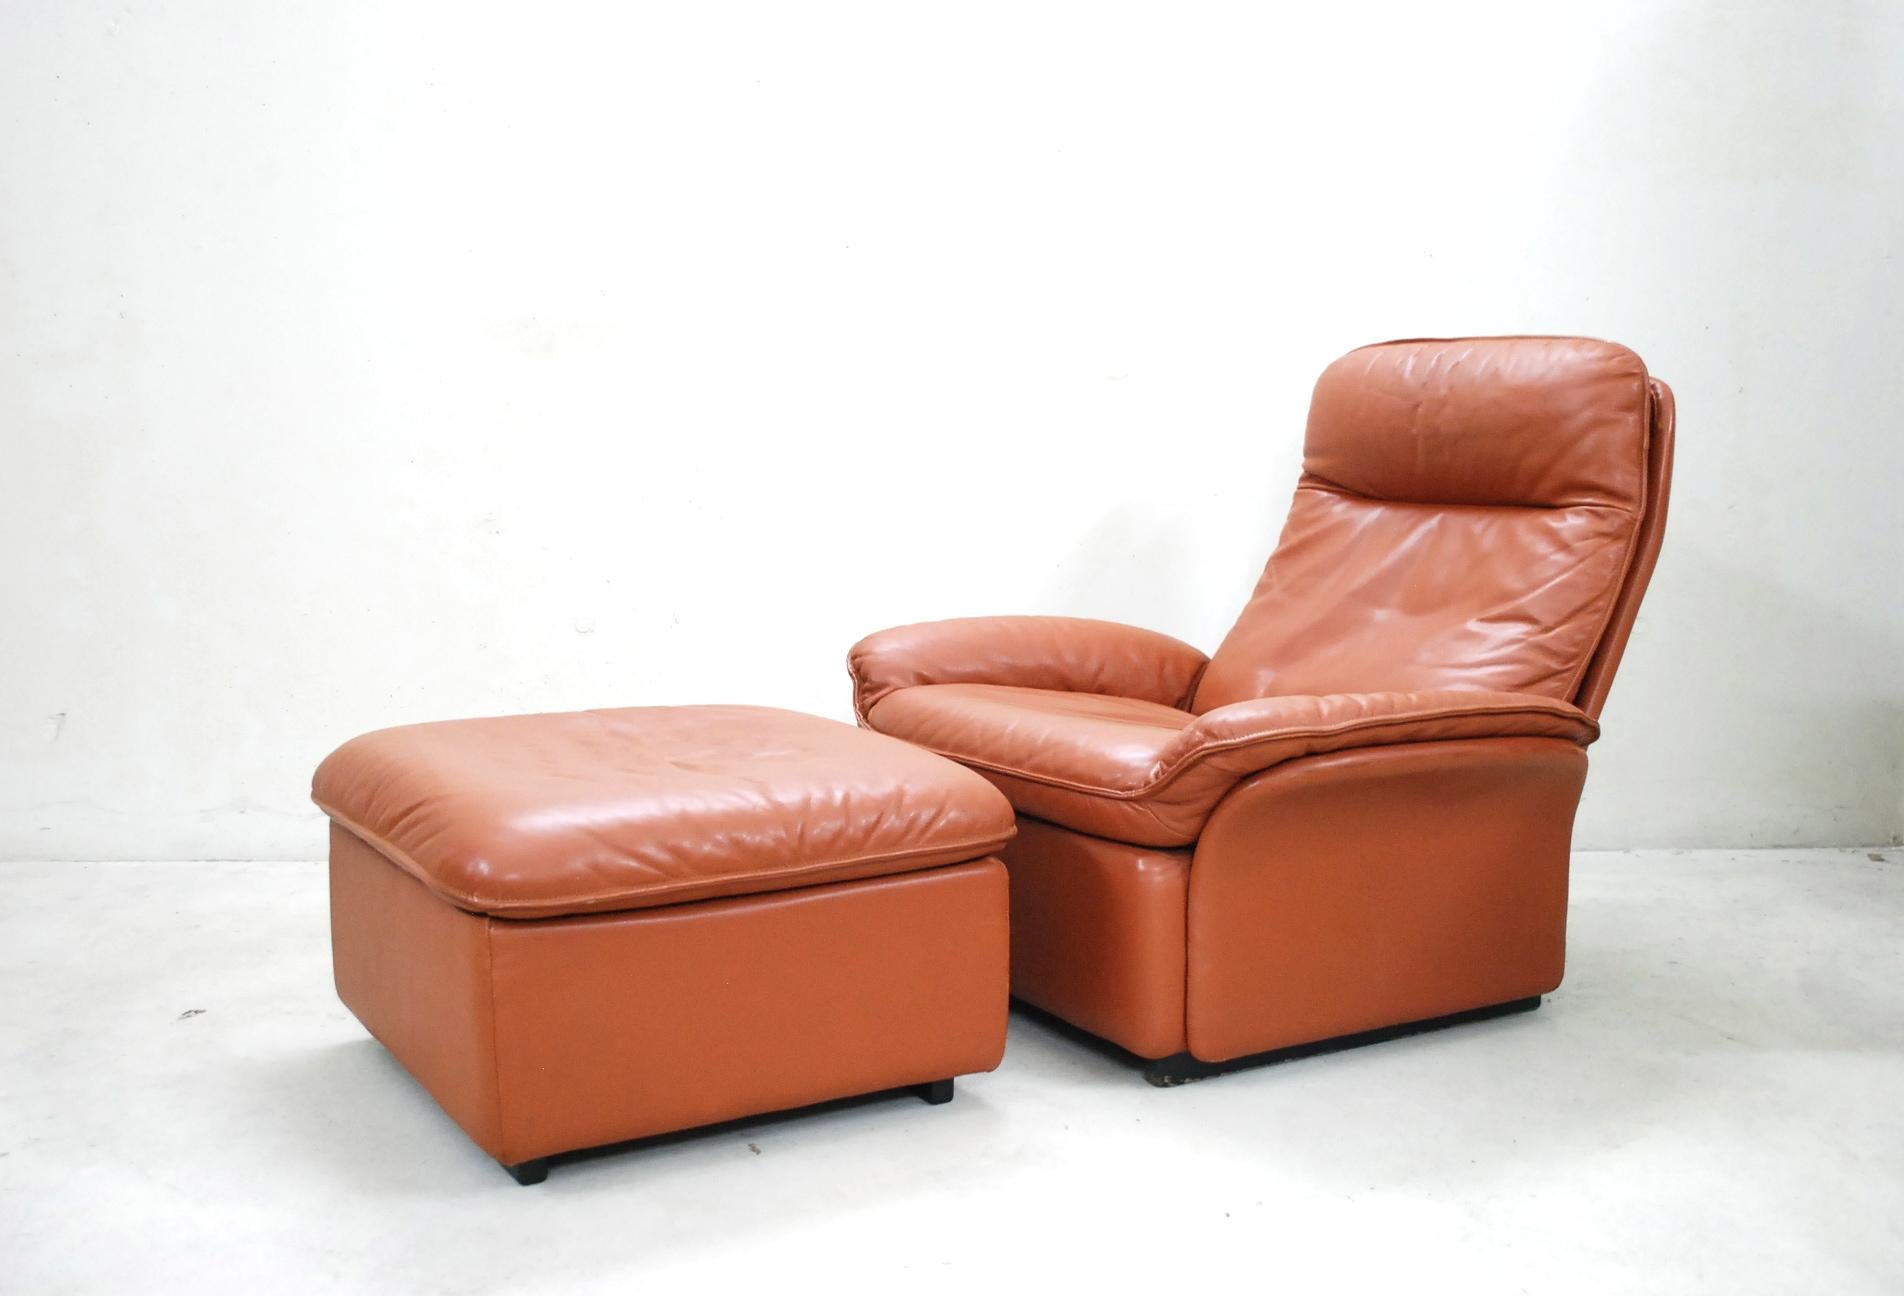 De Sede Model DS 49
This armchair and ottoman was produced in Switzerland by De Sede and is made of cognac brandy aniline leather.
It has a great comfort and an adjustable backrest.

Dimensions:
Armchair
Width 80 cm
Depth 85 cm
Height 82